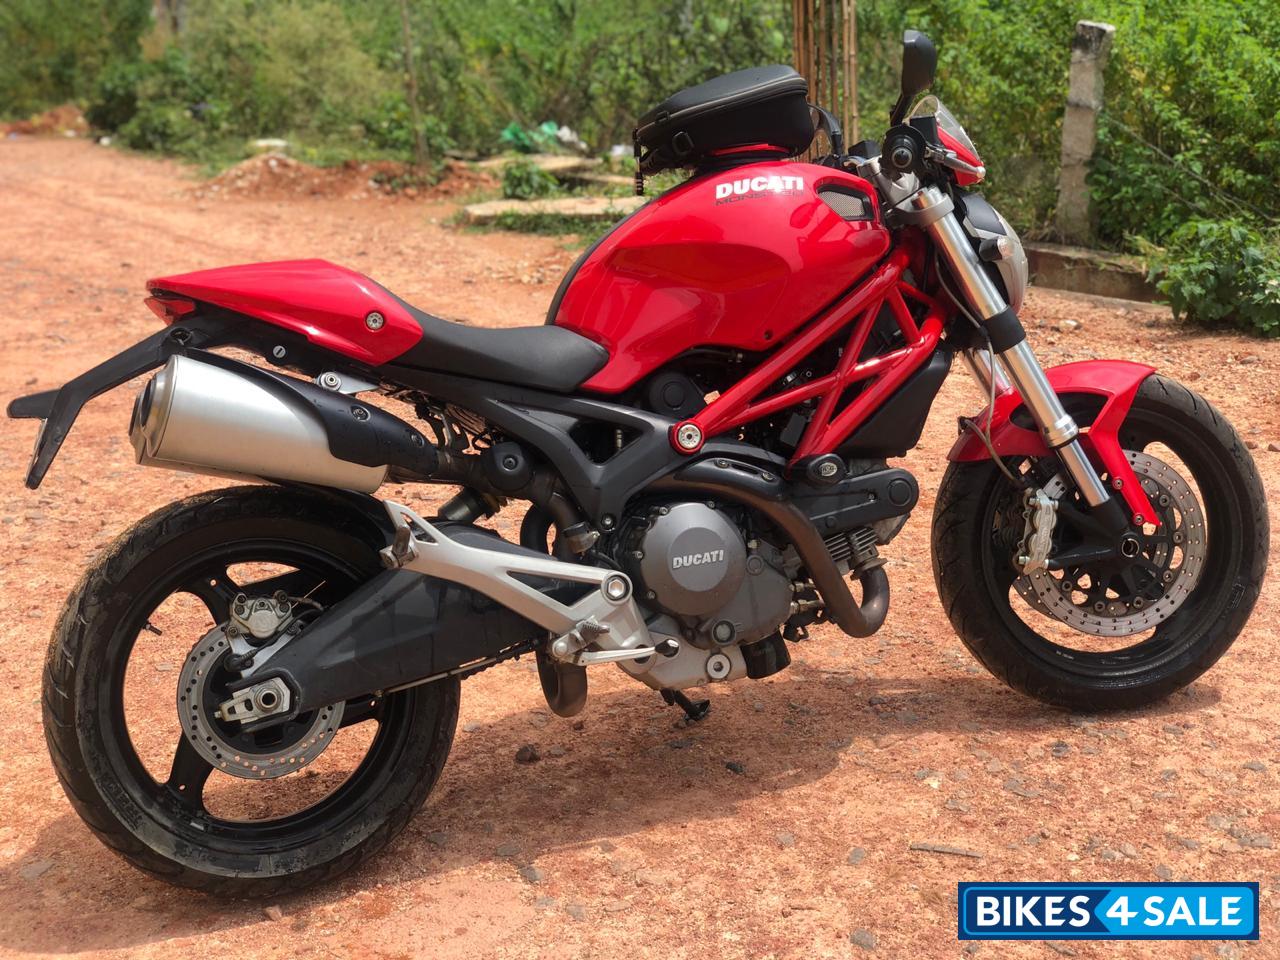 Used 2016 model Ducati Monster 795 for sale in Bangalore. ID 204774 ...